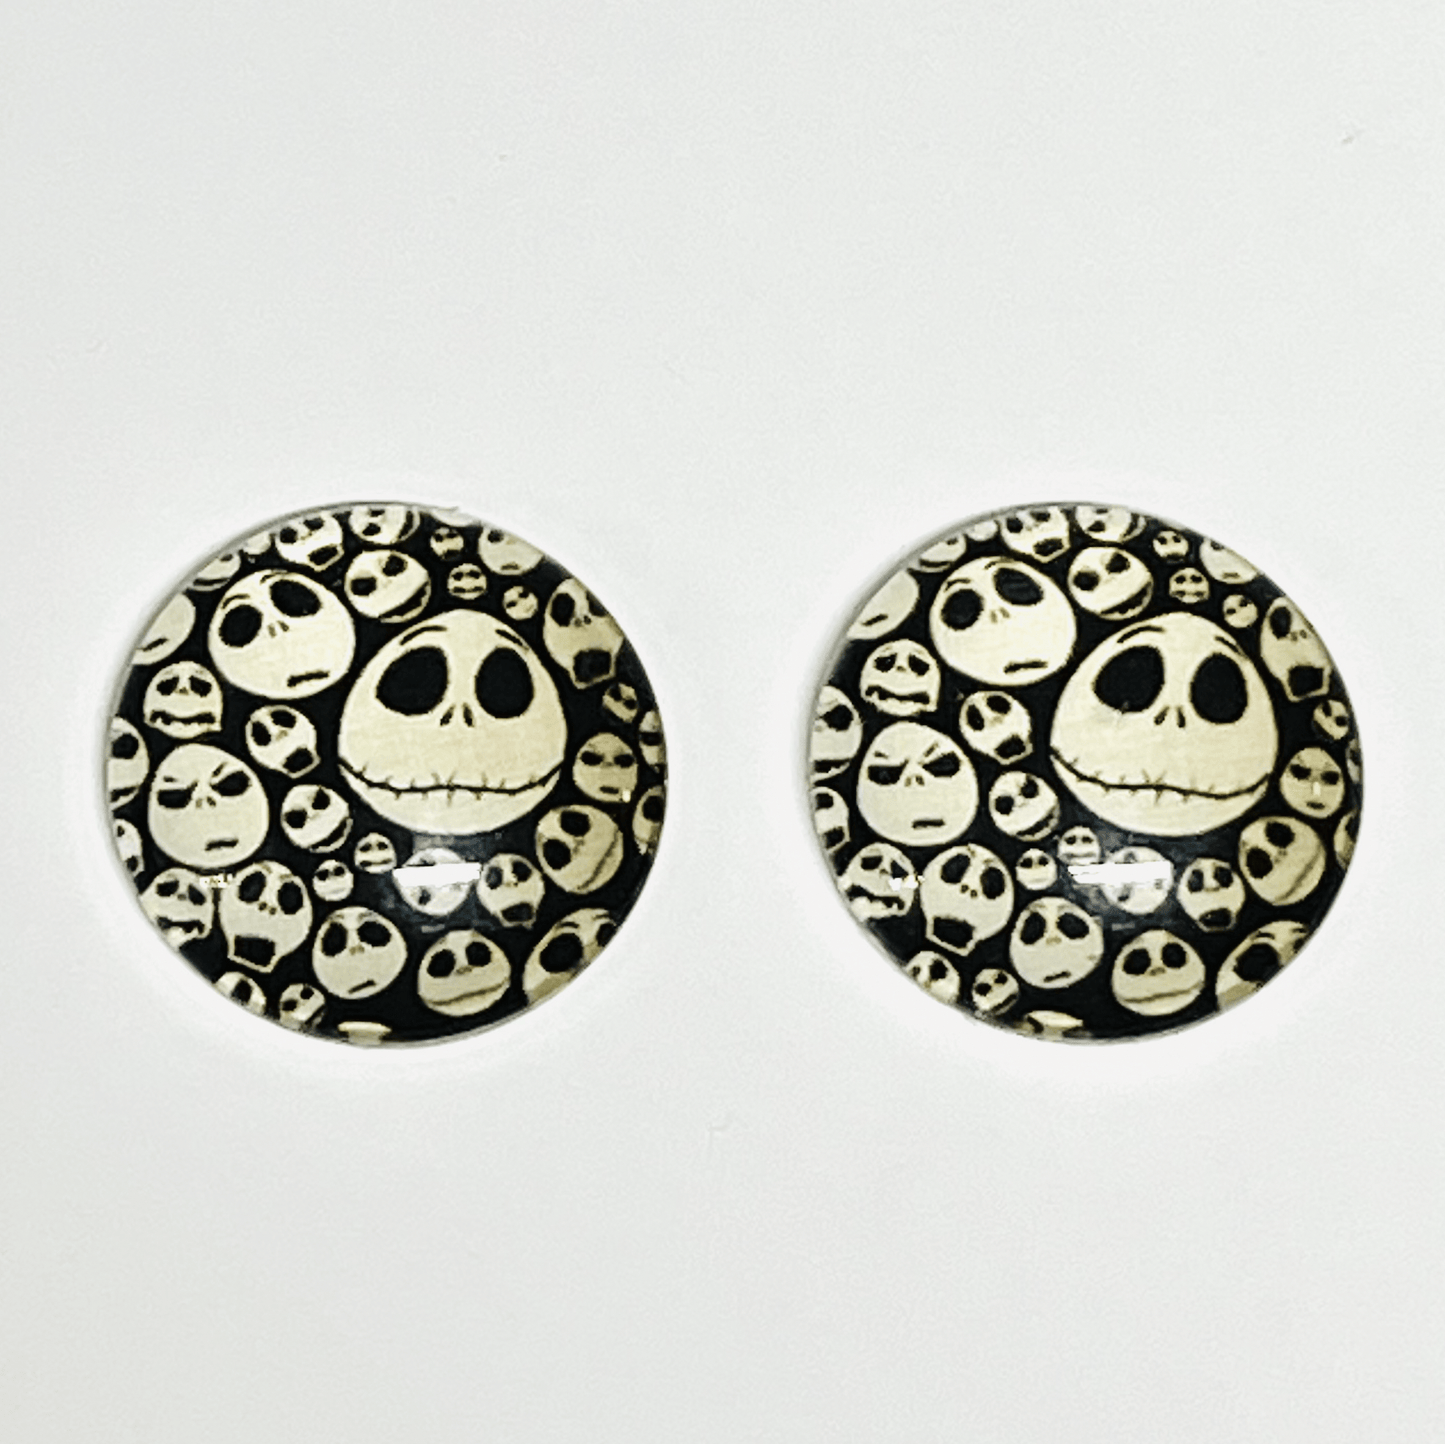 Sundaylace Creations & Bling Resin Gems 20mm "Nightmare Before Christmas" Cartoon Character Round Acrylic Printed Resin Gem